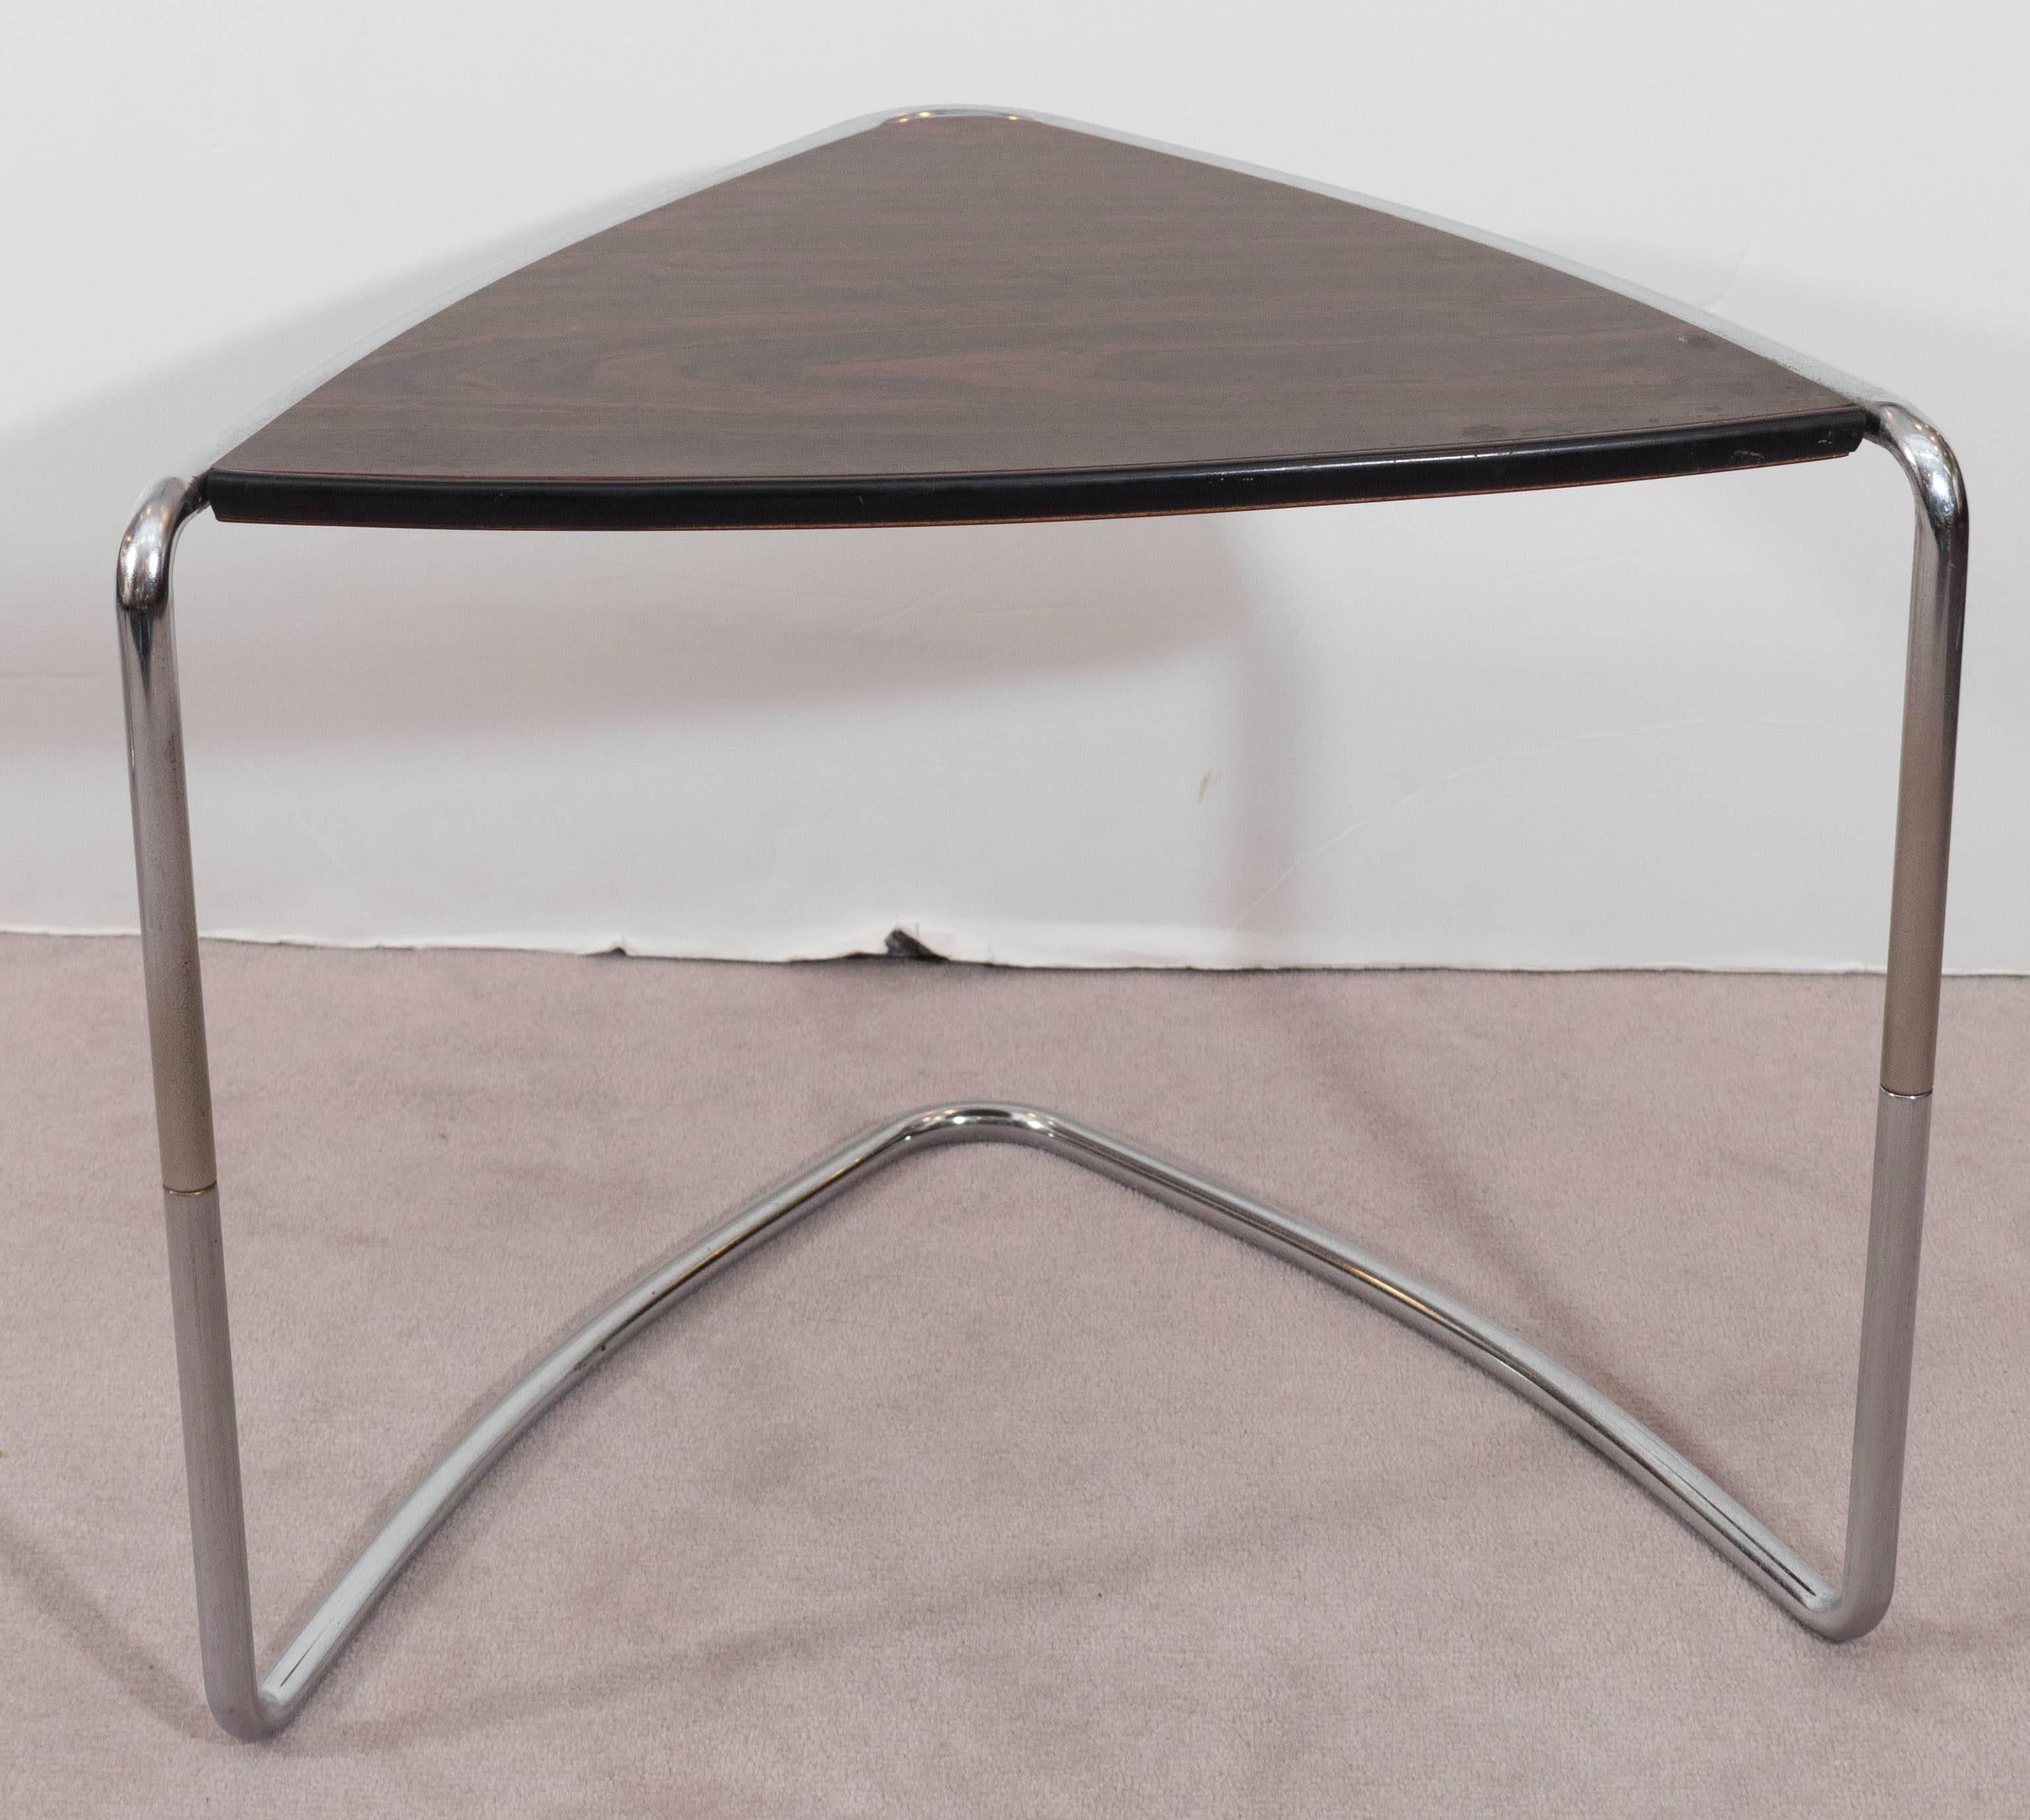 Laminated Set of Three Triangular Stacking Tables on Chrome